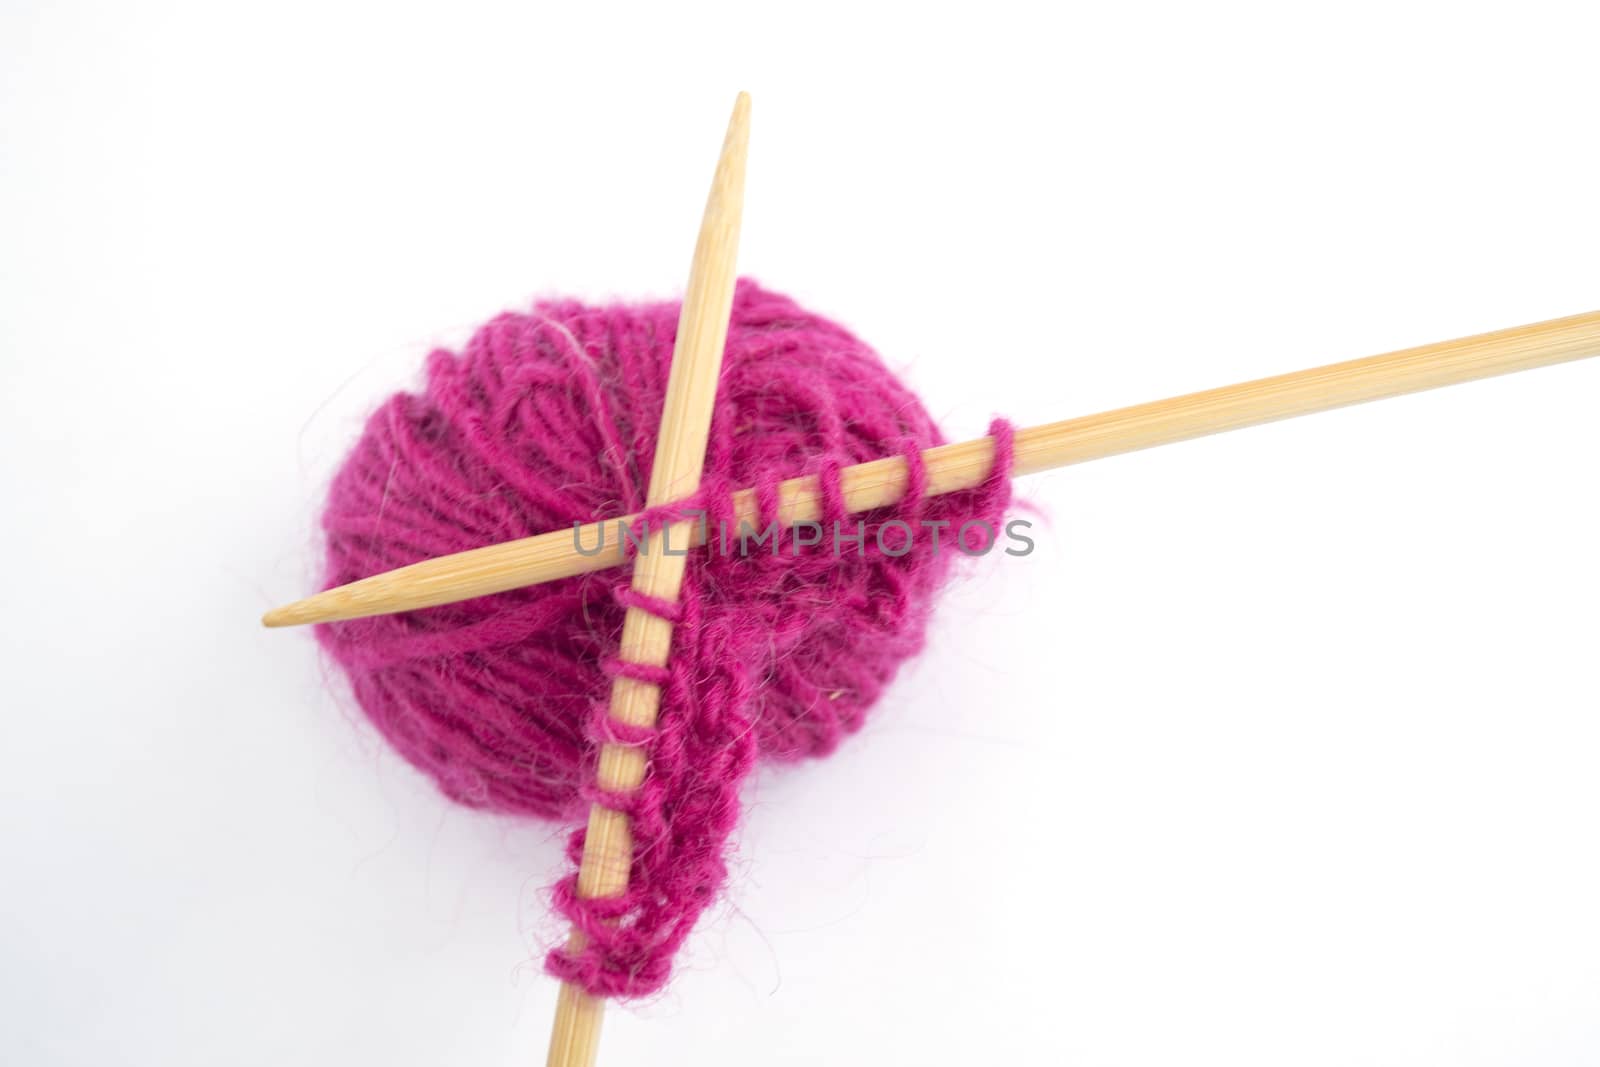 Close up of pink wool around knitting needles on a white background